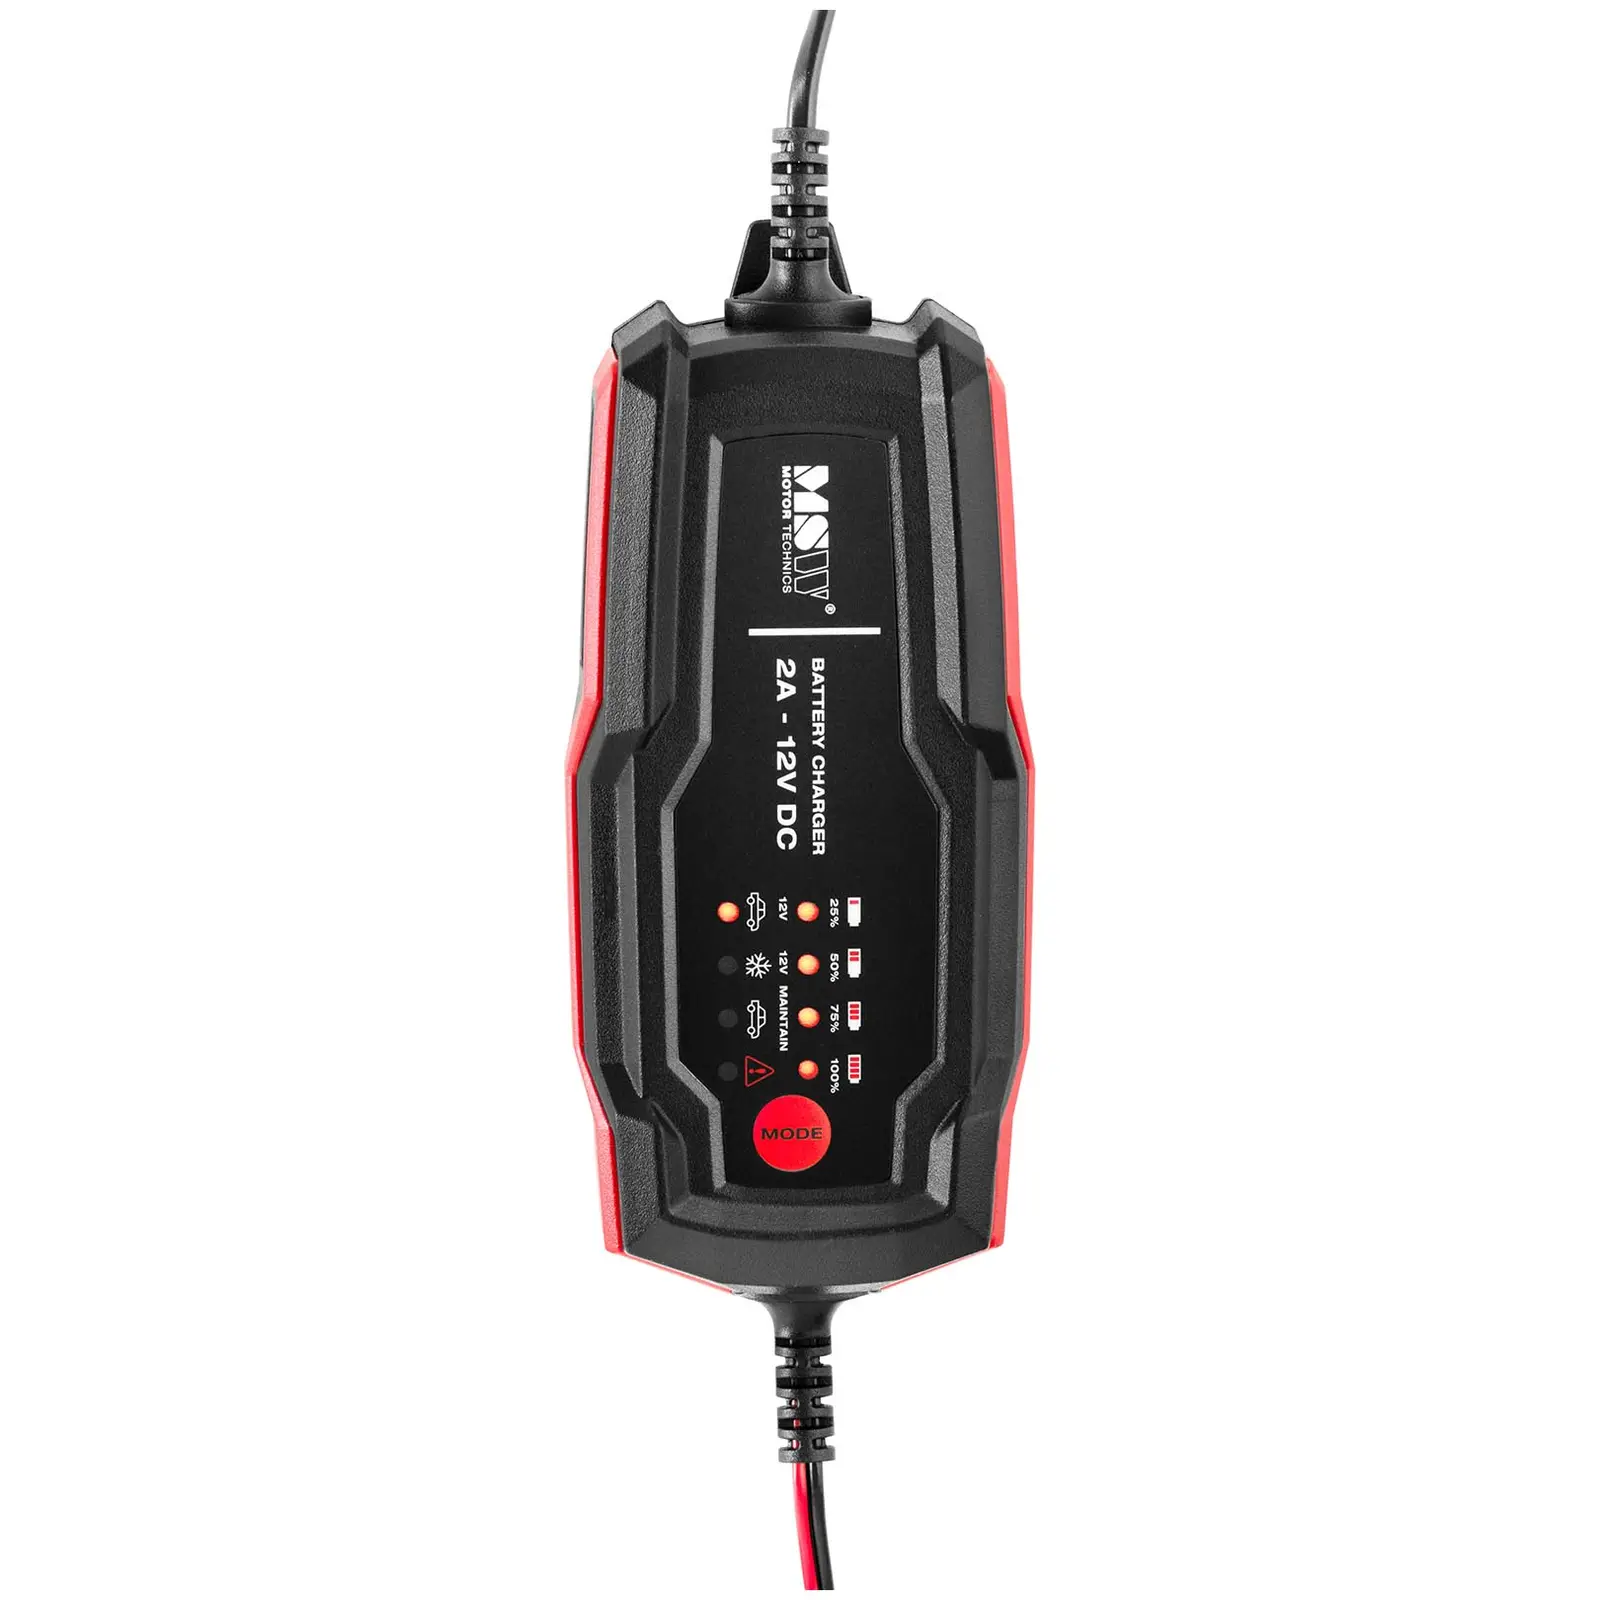 Fully automatic intelligent Car Battery Charger - 2 A - 12 V